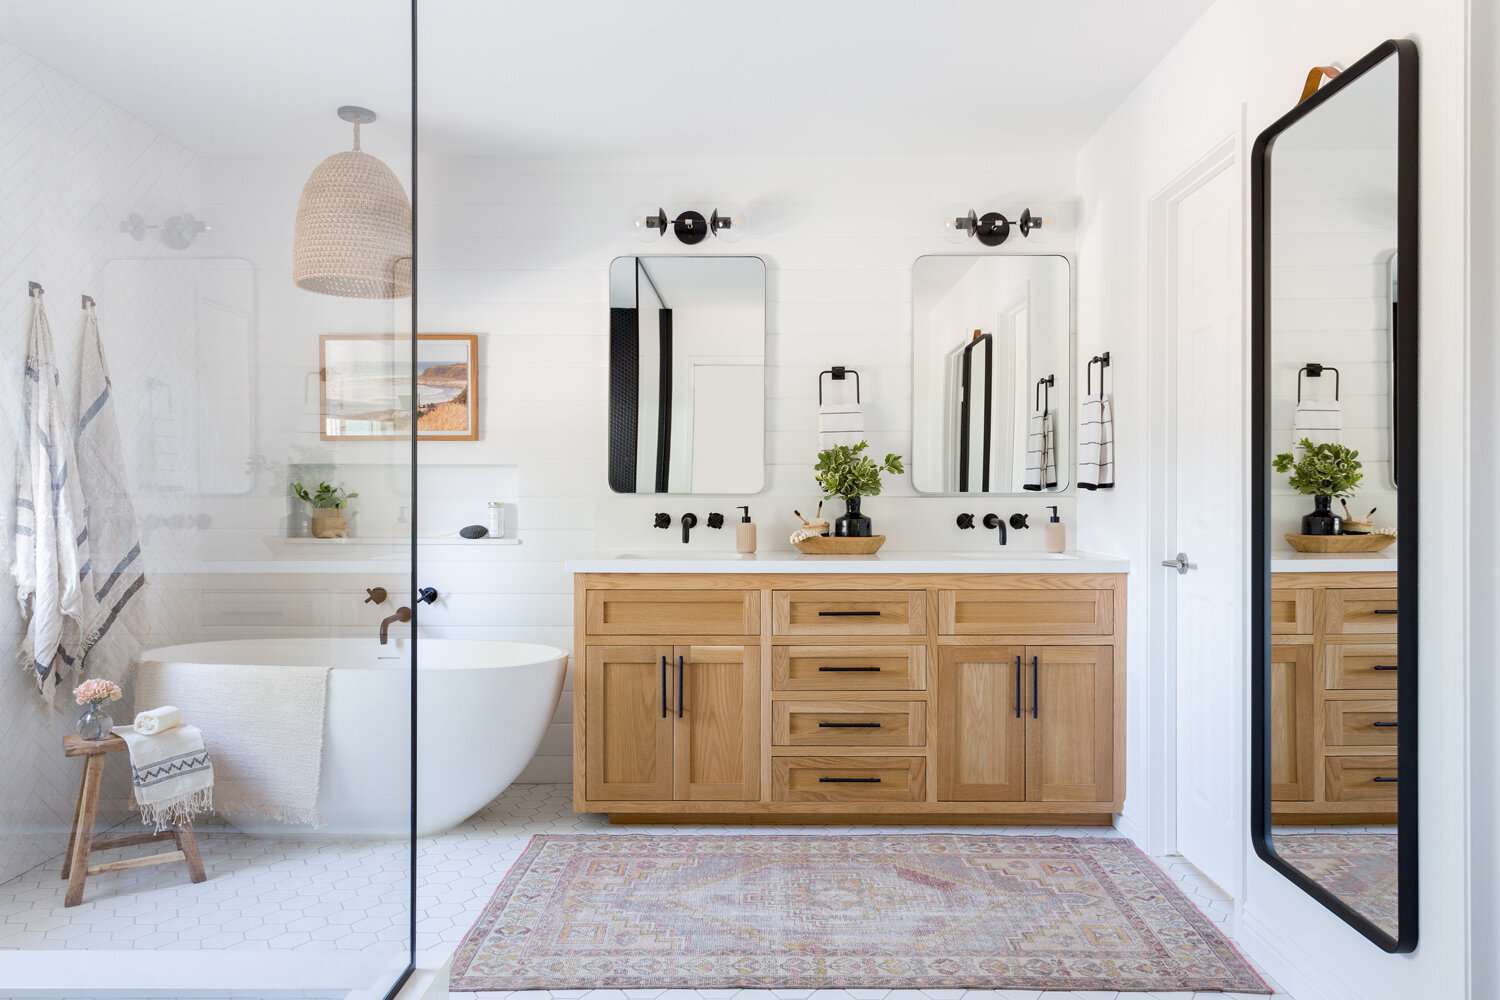 The Art of Small Space Optimization: From Studio Apartments to Bathroom Remodels